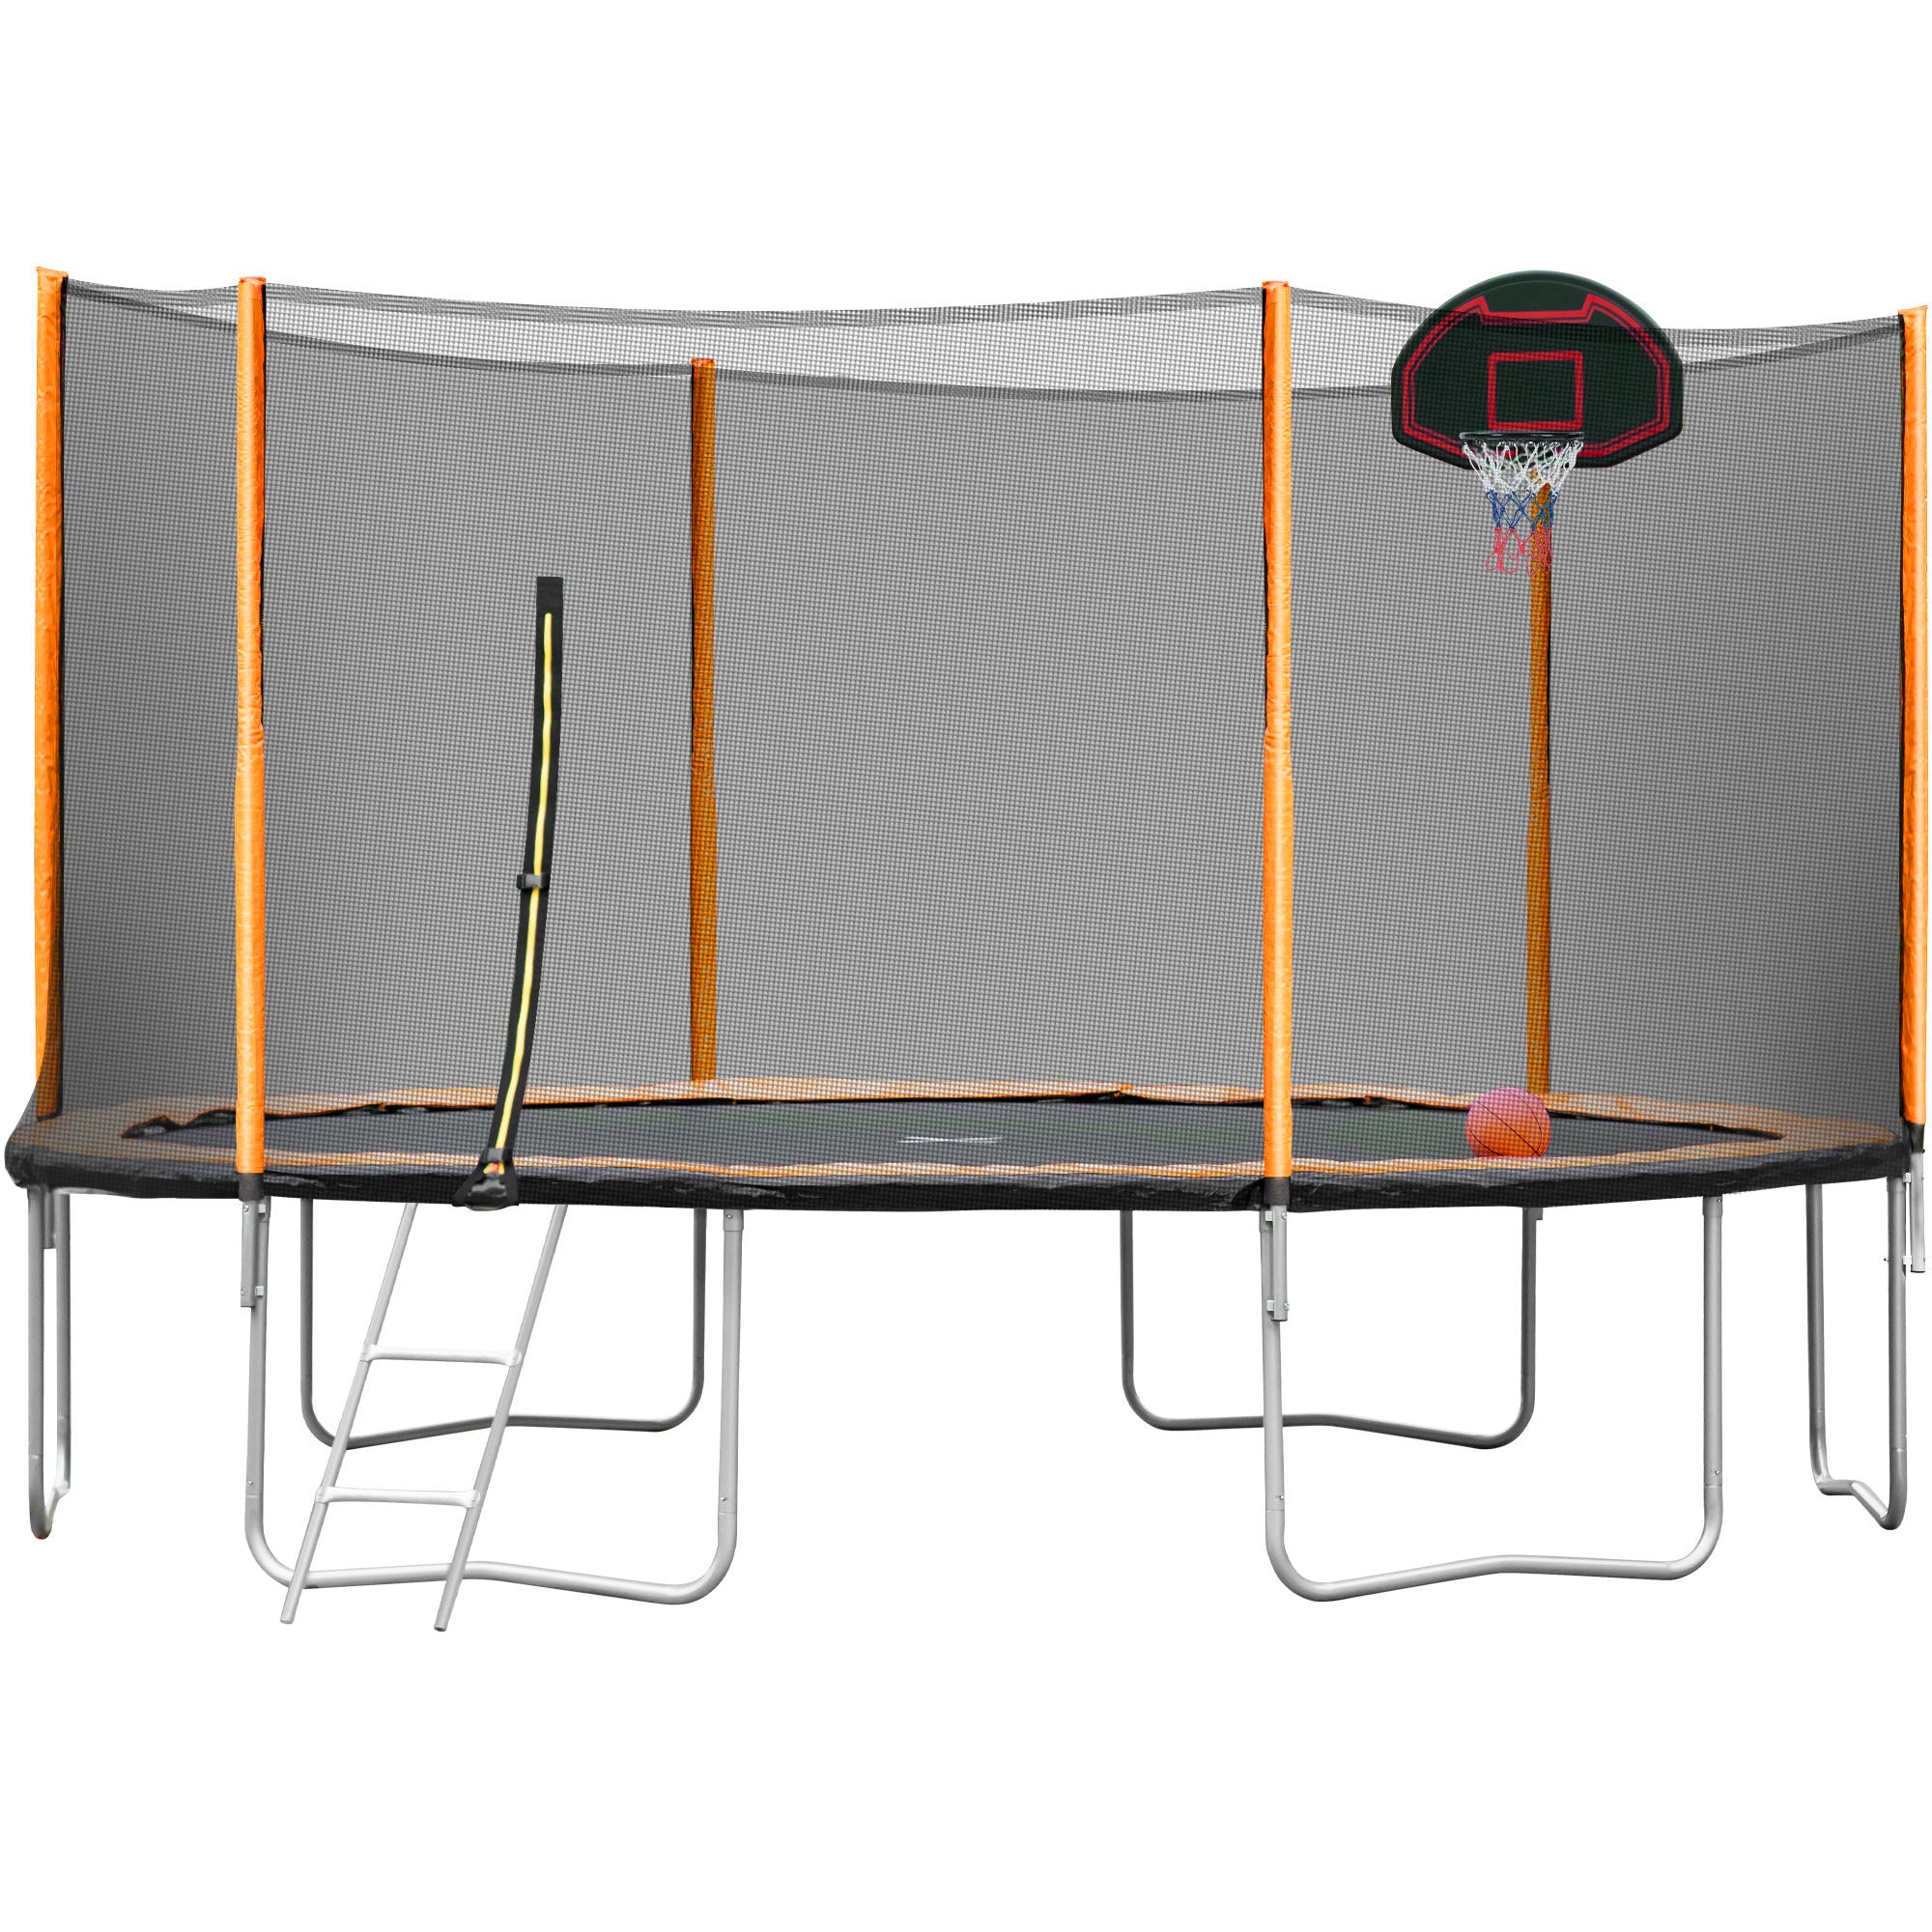 14ft Powder coated Advanced Trampoline with